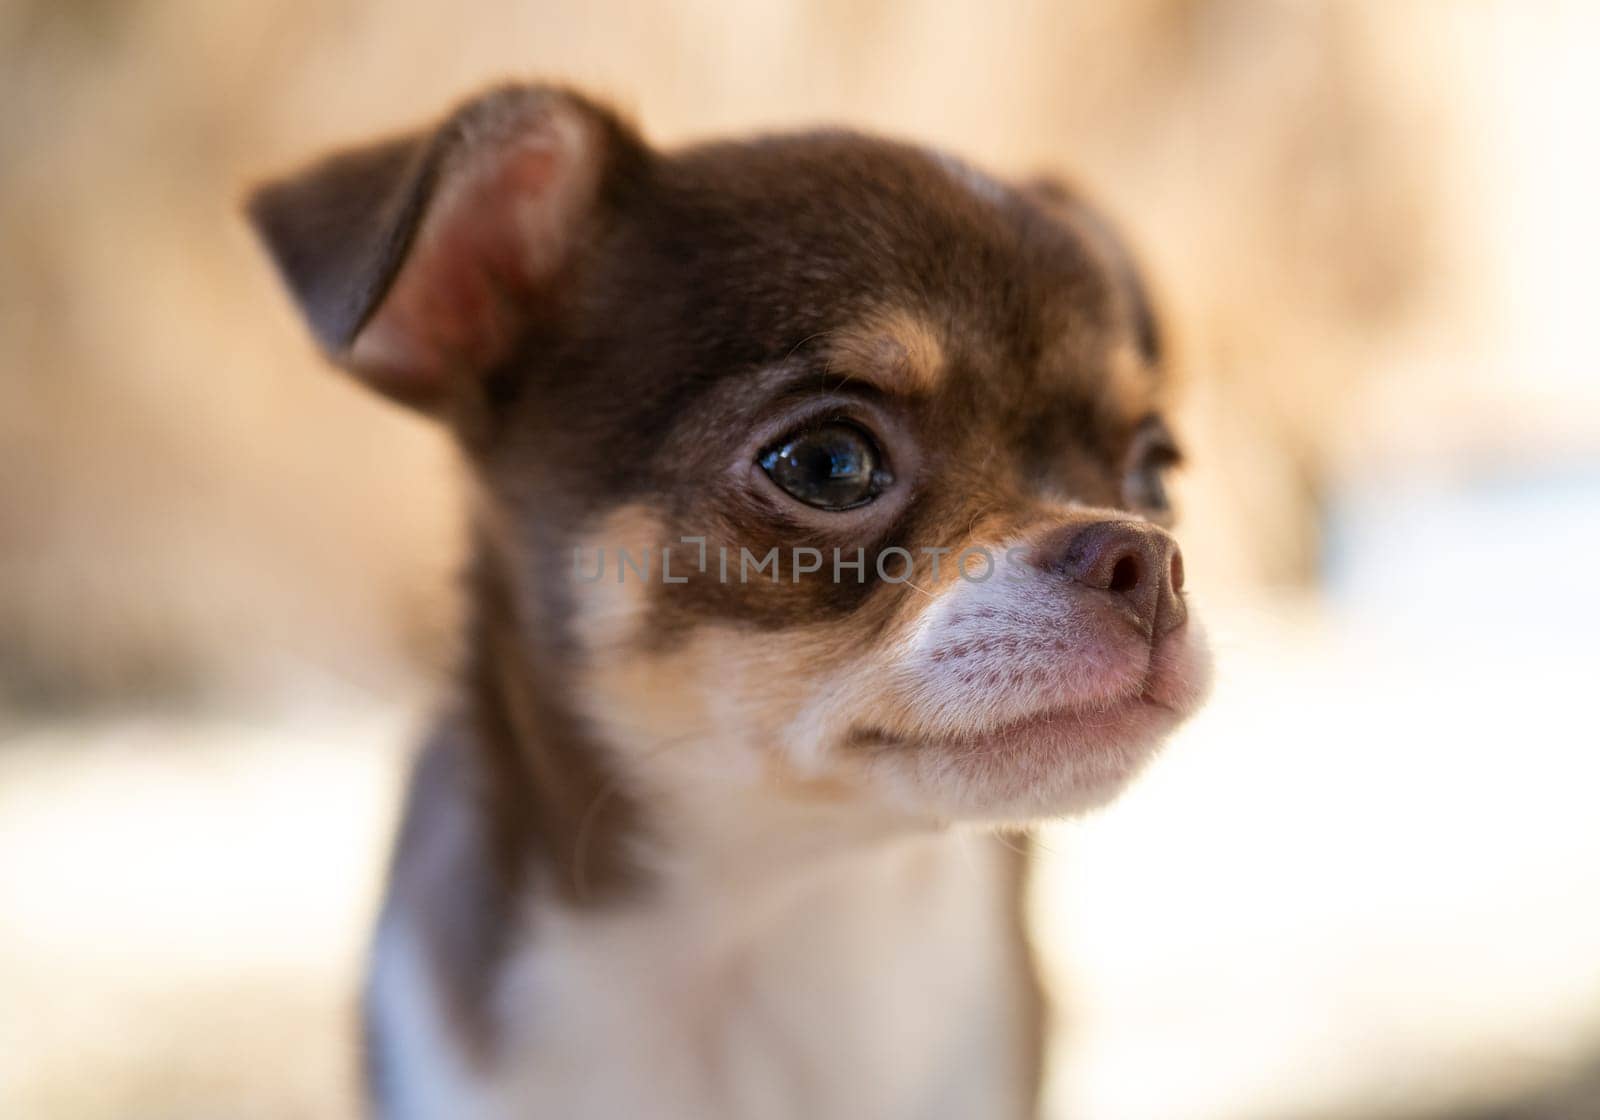 Pensive Chihuahua Puppy Profile by gcm